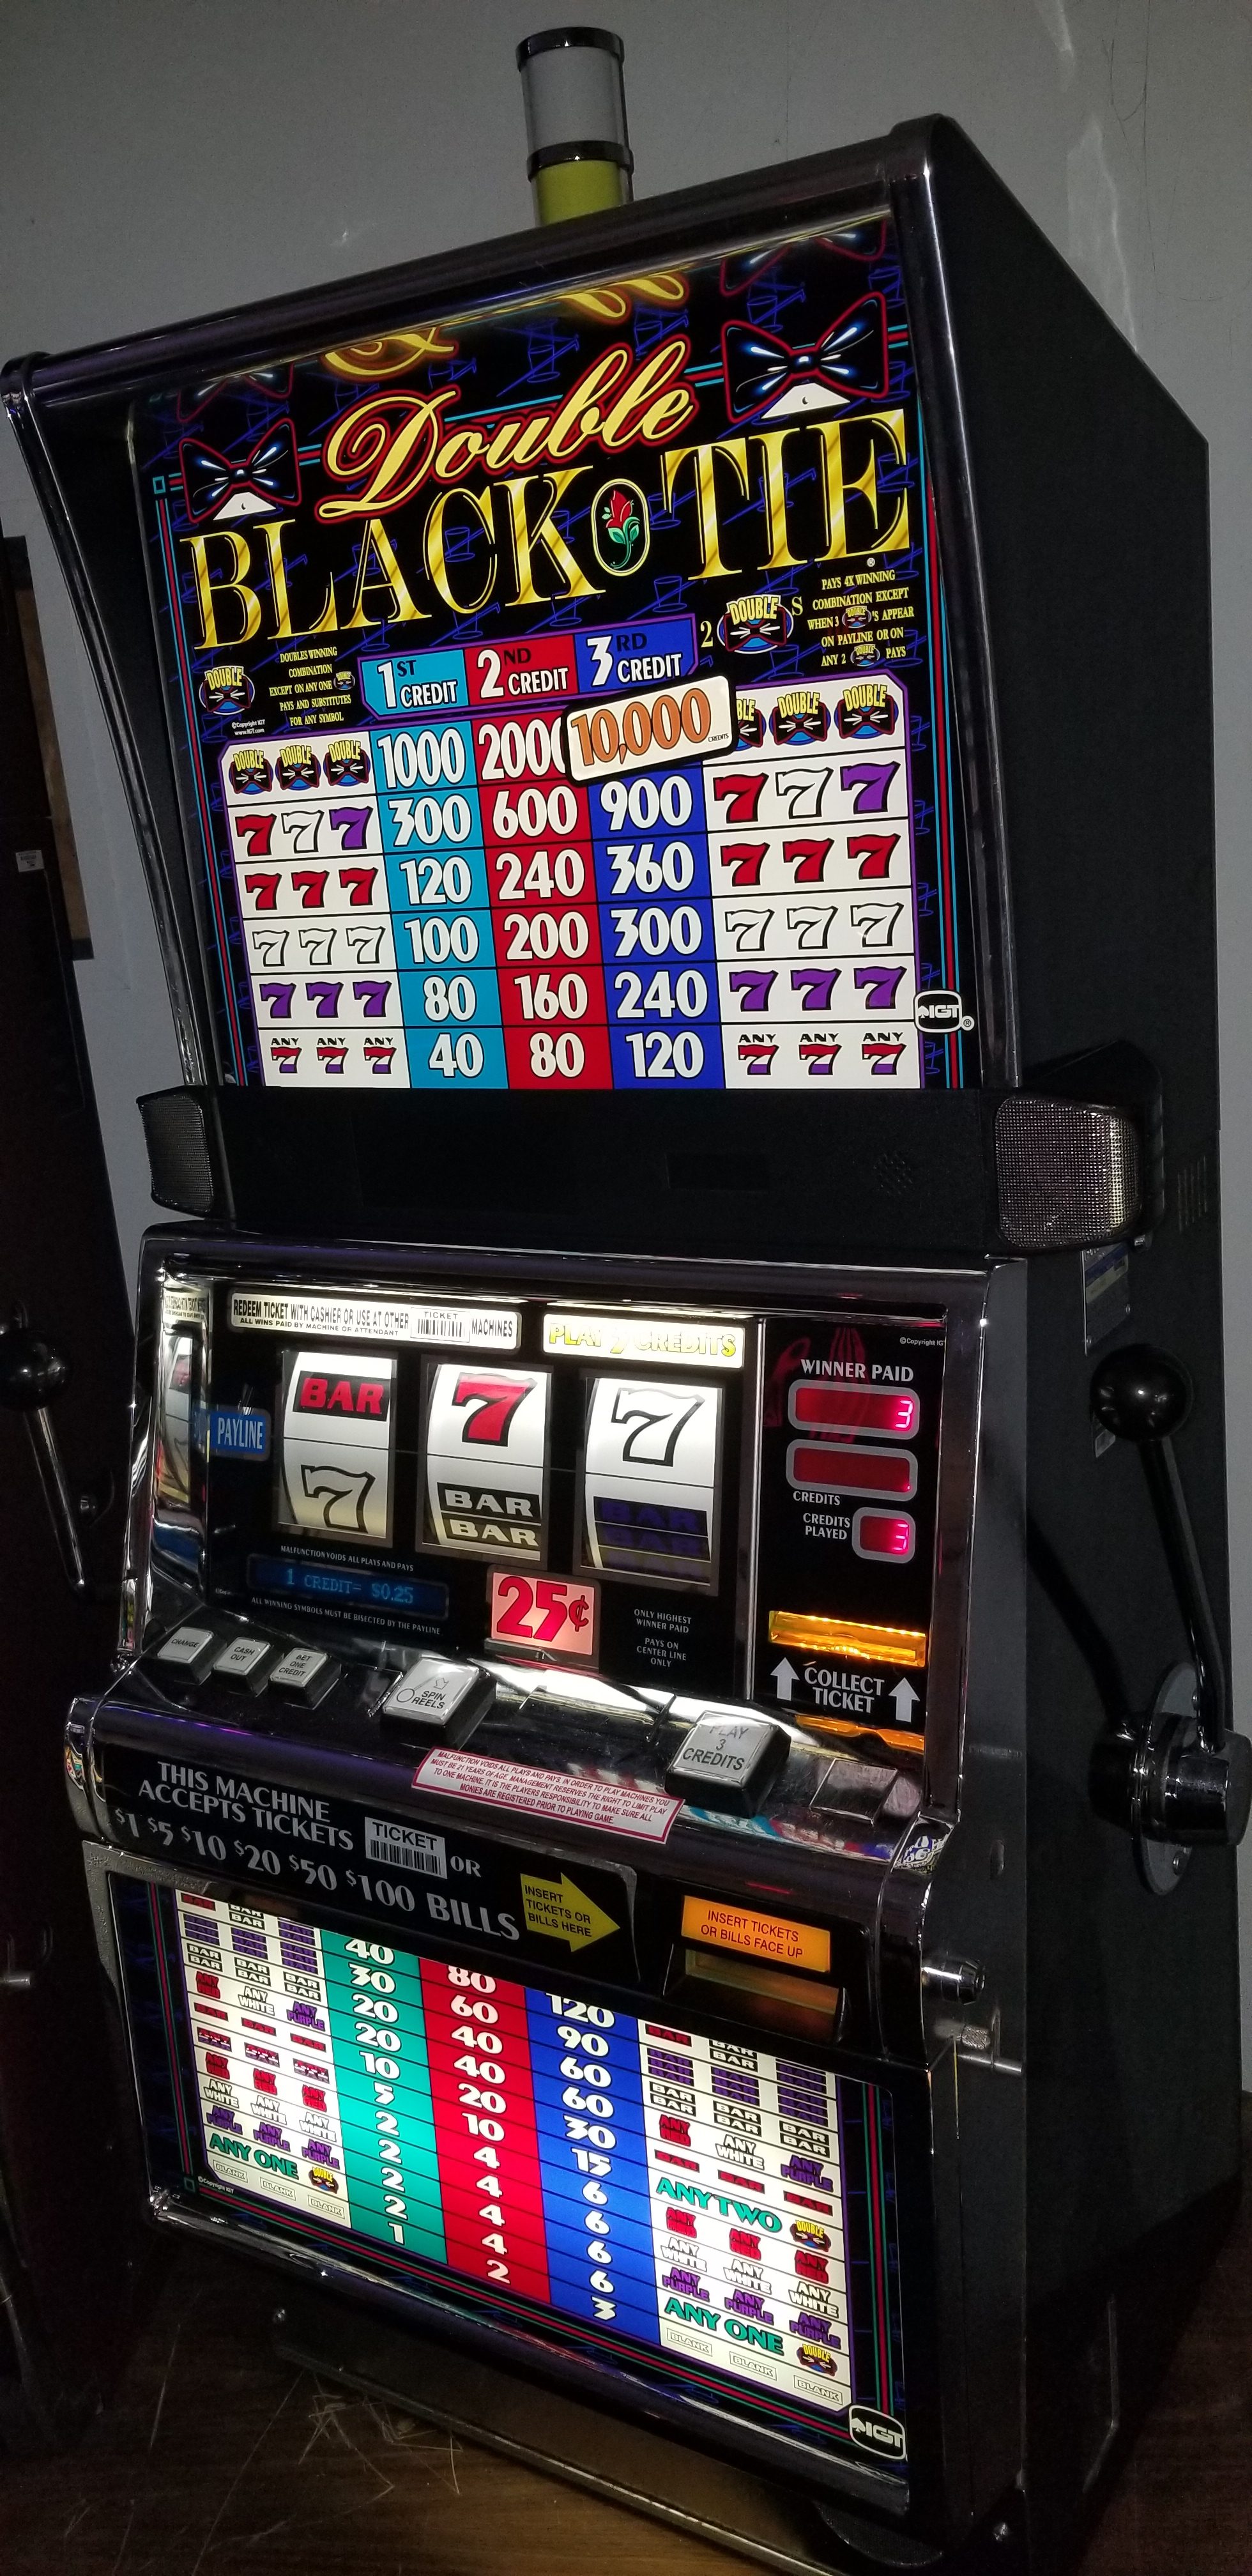 free slot machines for pc